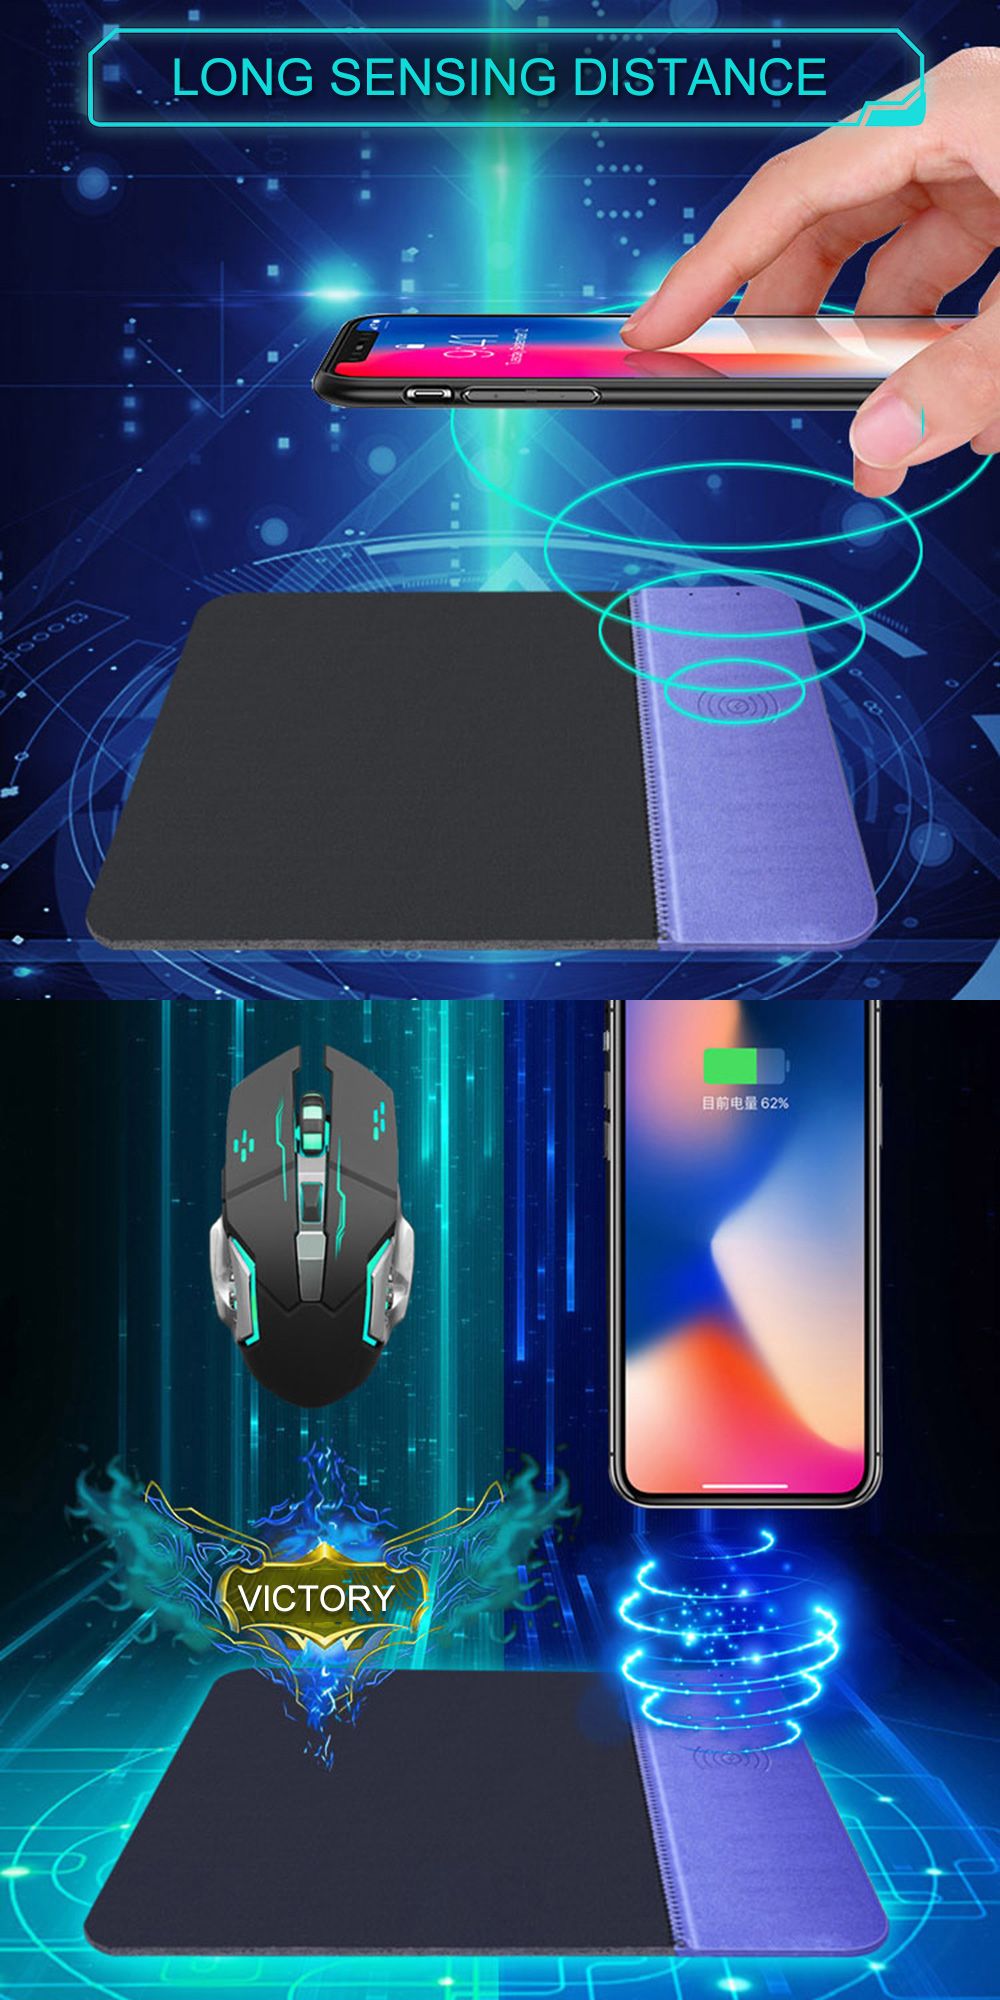 KEQU-Wireless-Charger-Mouse-Pad-Universal-Charger-for-iPhone-LG-Google-QI-Stardand-Smart-Wireless-Ch-1675249